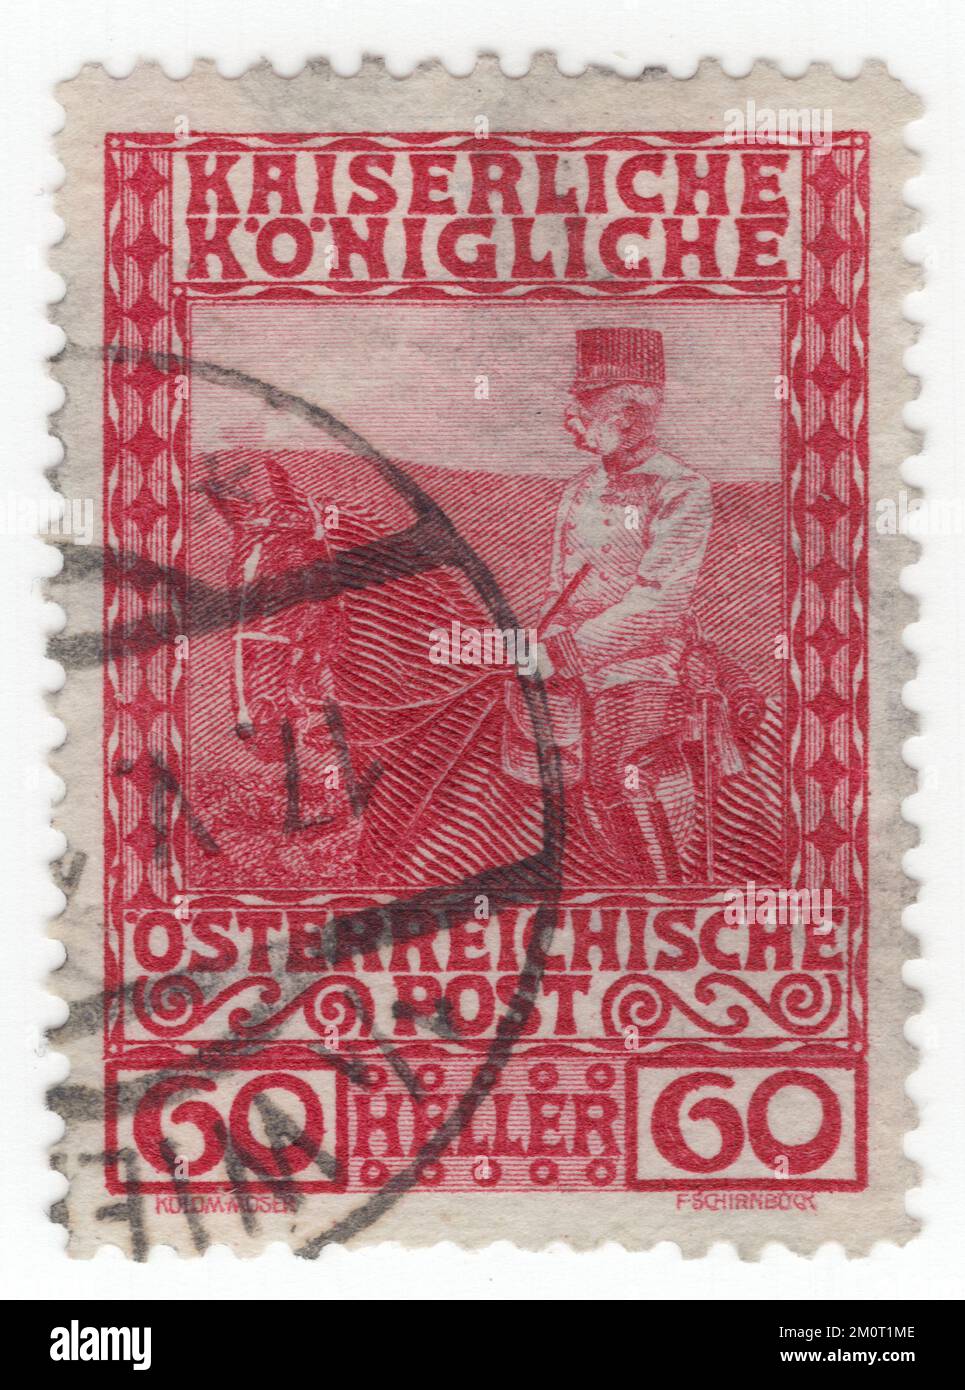 AUSTRIA — 1908: An 350 heller dark green postage stamp depicting portrait of Franz Joseph I. Definitive set issued for the 60th year of the reign of Austrian Monarch Franz Josef, Emperor of Austria, King of Hungary, and the other states of the Habsburg monarchy. Franz Joseph I or Francis Joseph I  was Emperor of Austria, King of Hungary, and the other states of the Habsburg monarchy from 2 December 1848 until his death on 21 November 1916. In the early part of his reign, his realms and territories were referred to as the Austrian Empire, but were reconstituted as the dual monarchy Stock Photo